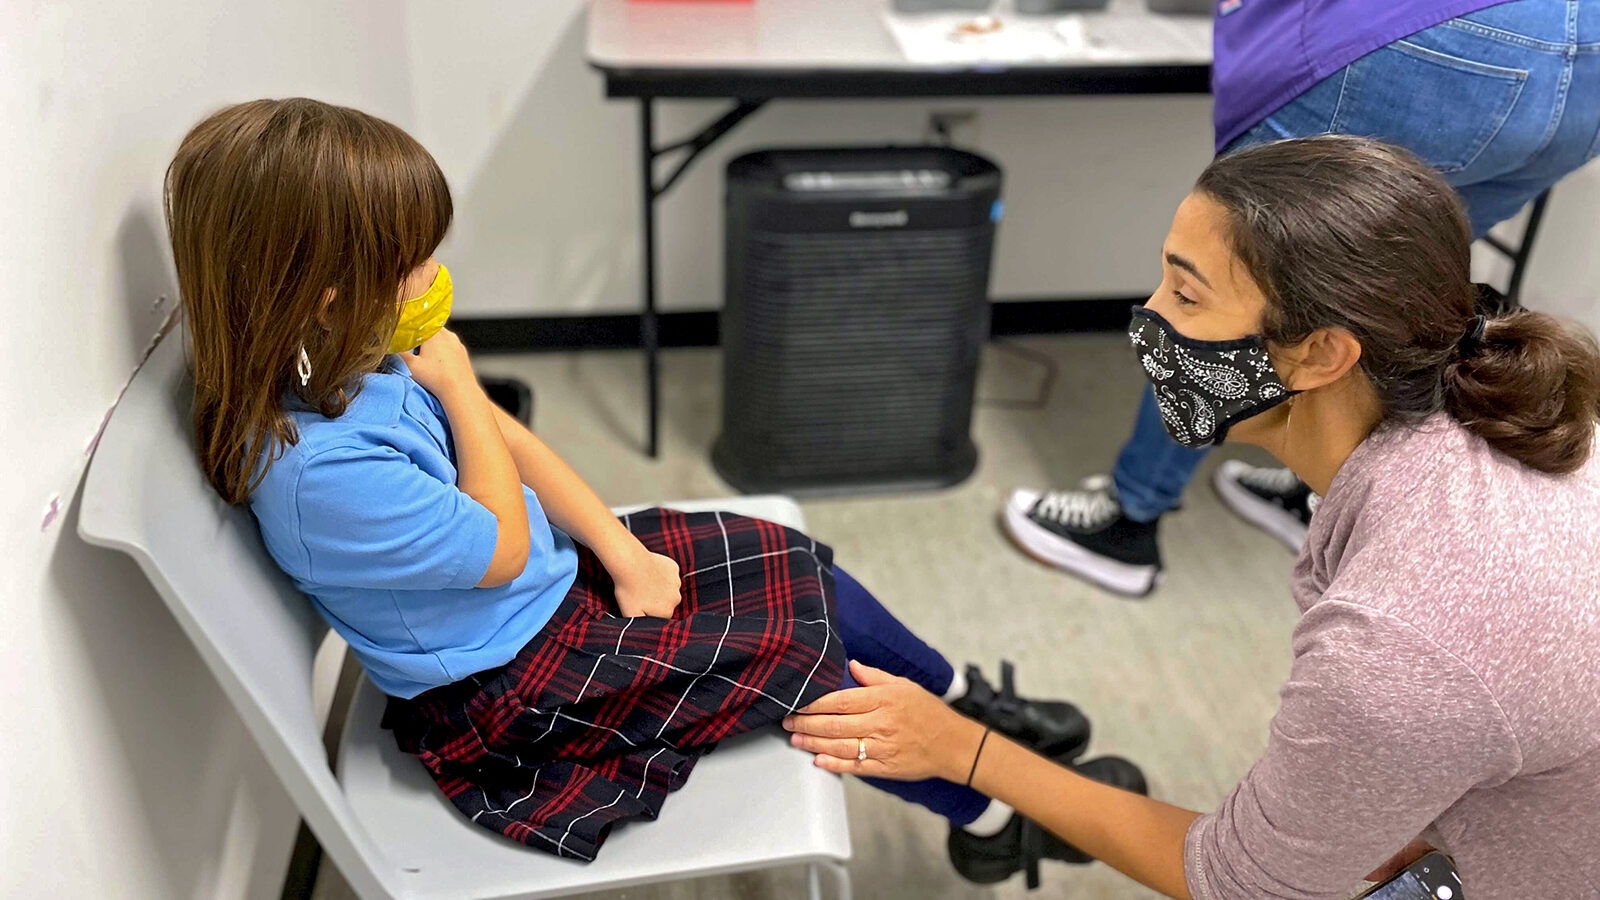 Anjali, 5, rolls up her sleeve in preparation to receiver her COVID-19 vaccine at New Orleans' Crescent Care. Her mother, Priya Lewis, is comforting her before she receives the shot.